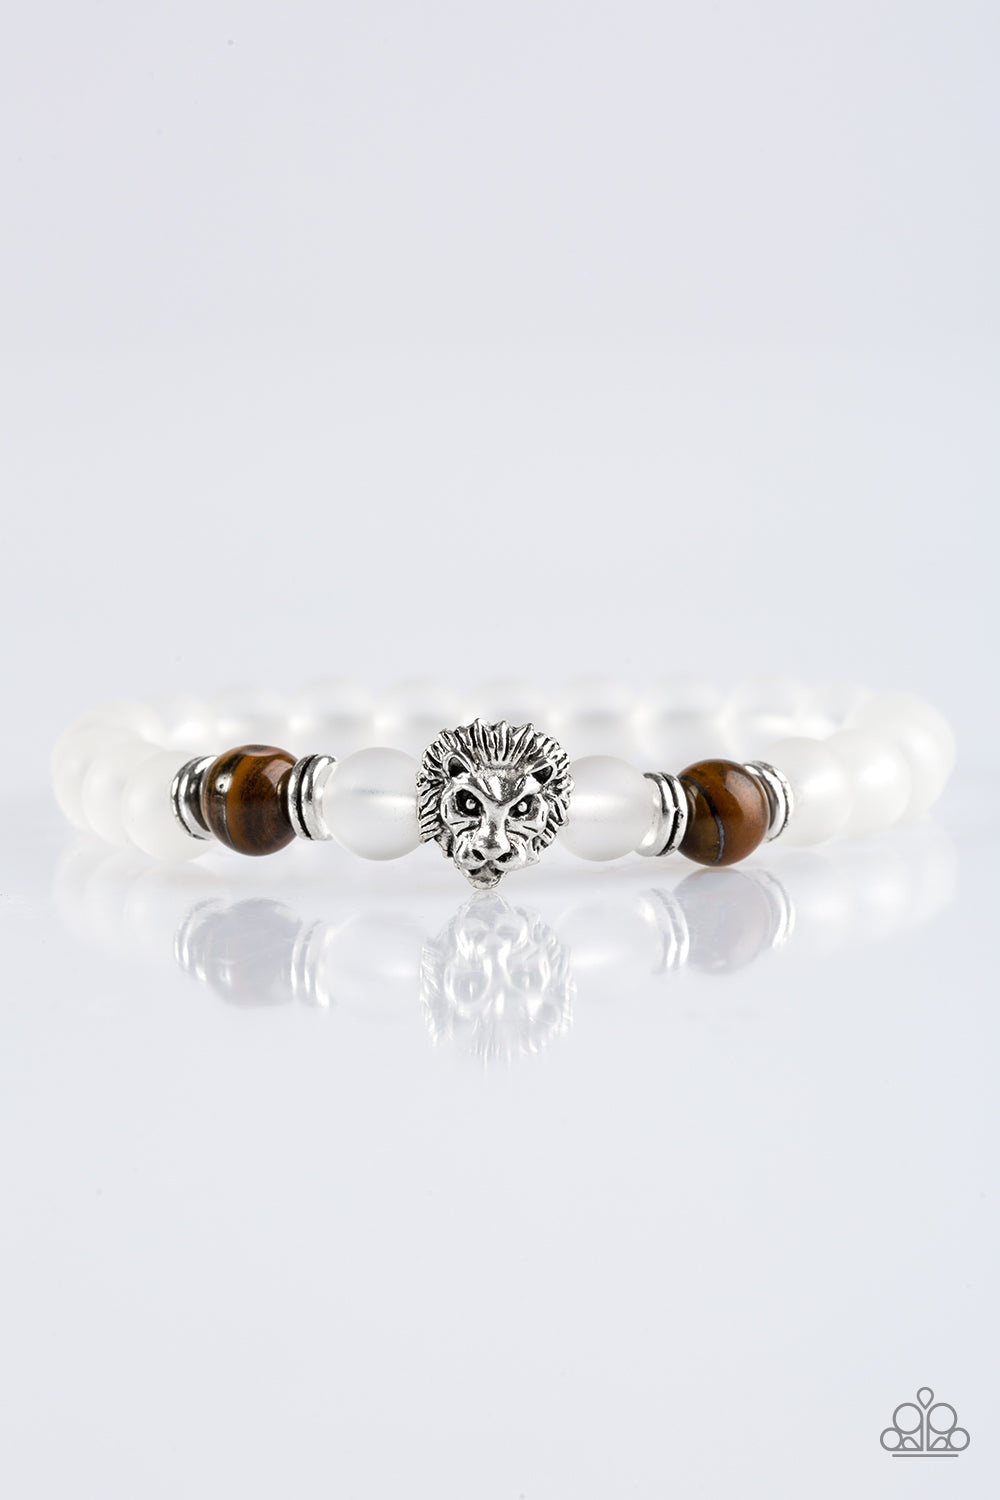 The Lions Share - Brown Lion Bracelet - Paparazzi Accessories - Infused with a silver lion charm, glassy white and energetic tiger's eye stones are threaded along a stretchy elastic band for a seasonal look. Sold as one individual bracelet.